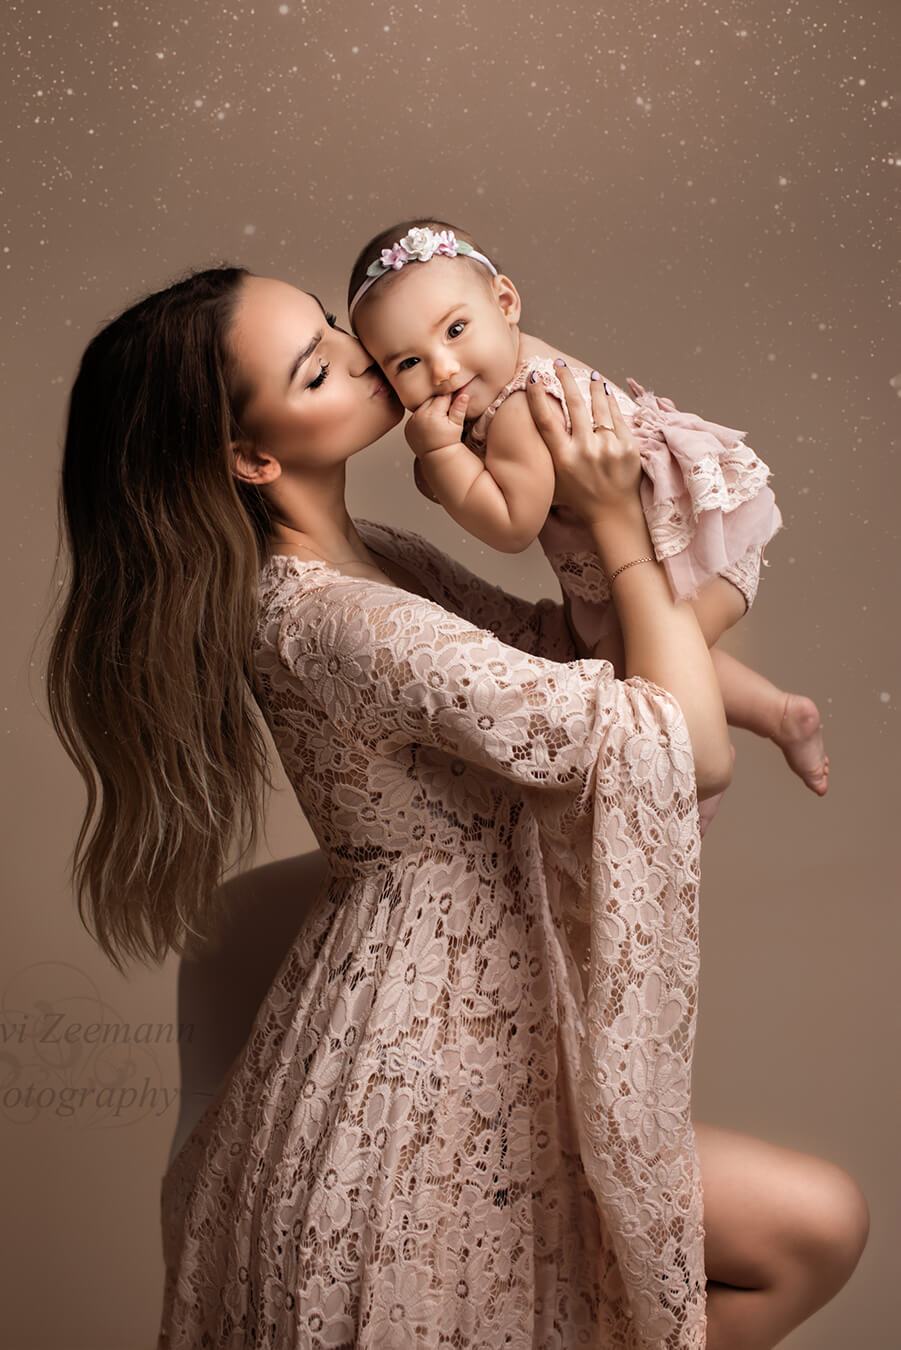 Photo session between mother and daughter. The mother has long brown hair and is holding her baby girl whilst giving her a kiss. The little girl stares and smiles at the camera. They are both wearing dresses in dusty punk color made of lace. The baby has a delicate head band with flowers. 